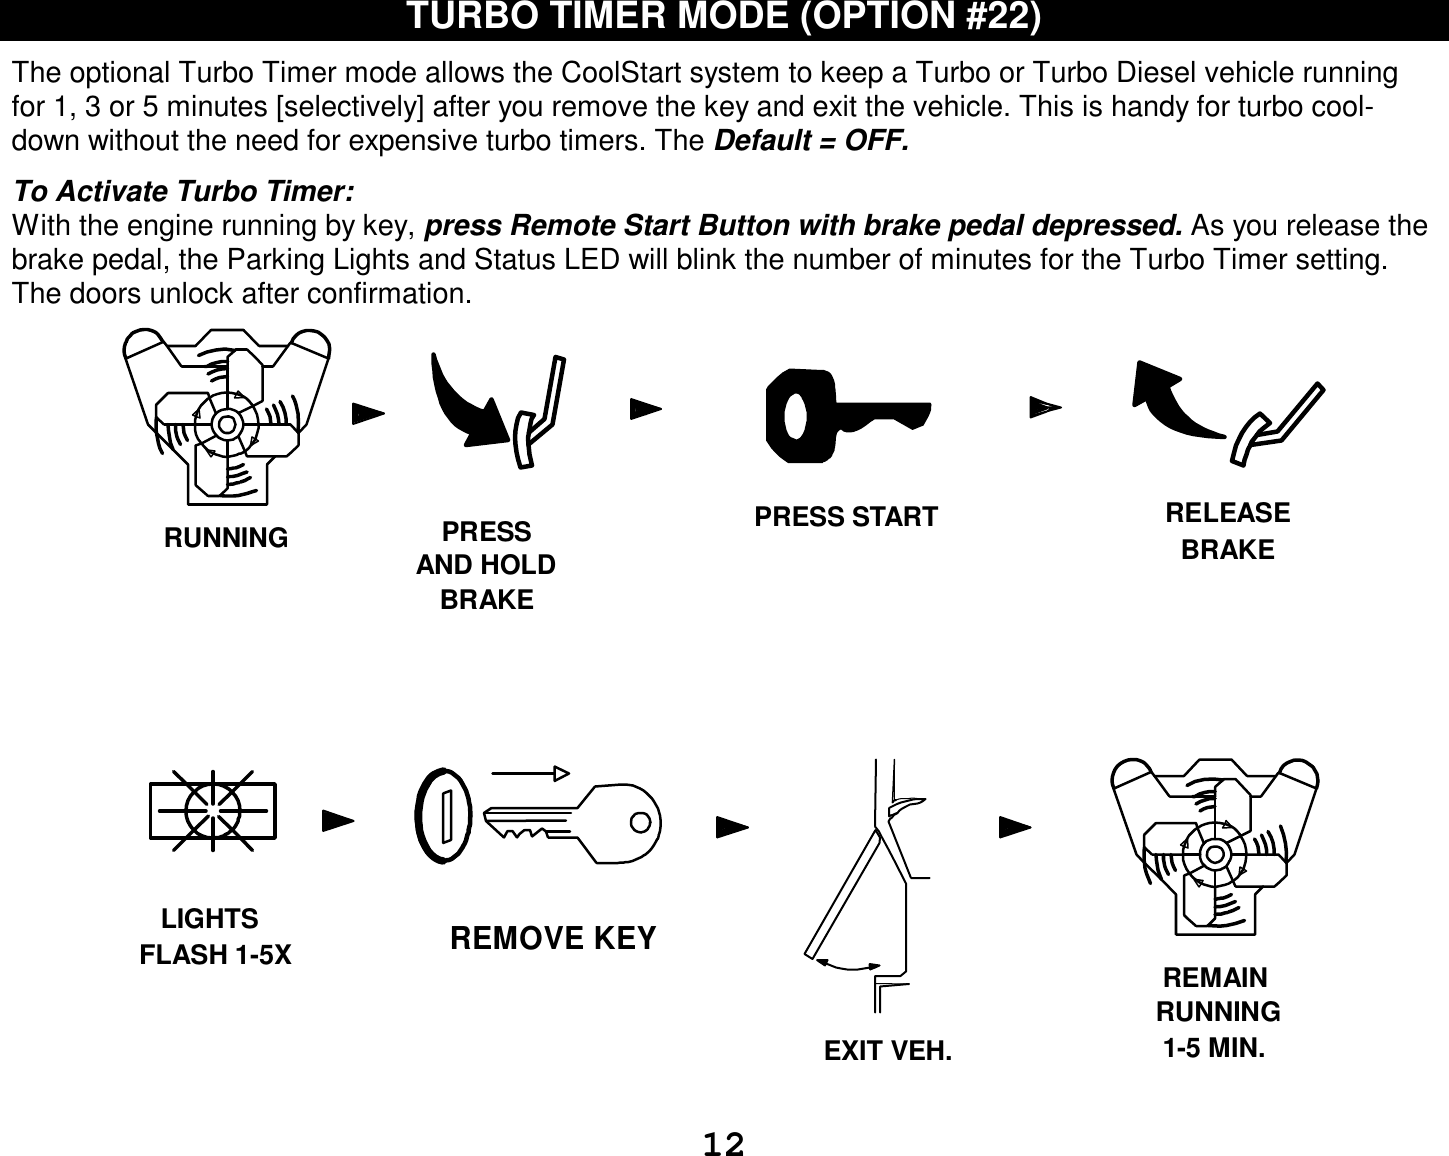  12 TURBO TIMER MODE (OPTION #22)  The optional Turbo Timer mode allows the CoolStart system to keep a Turbo or Turbo Diesel vehicle running for 1, 3 or 5 minutes [selectively] after you remove the key and exit the vehicle. This is handy for turbo cool-down without the need for expensive turbo timers. The Default = OFF.  To Activate Turbo Timer: With the engine running by key, press Remote Start Button with brake pedal depressed. As you release the brake pedal, the Parking Lights and Status LED will blink the number of minutes for the Turbo Timer setting. The doors unlock after confirmation.      REMOVE KEYFLASH 1-5XEXIT VEH.PRESSAND HOLDBRAKERUNNING RELEASEBRAKELIGHTSRUNNINGREMAIN1-5 MIN.PRESS START 